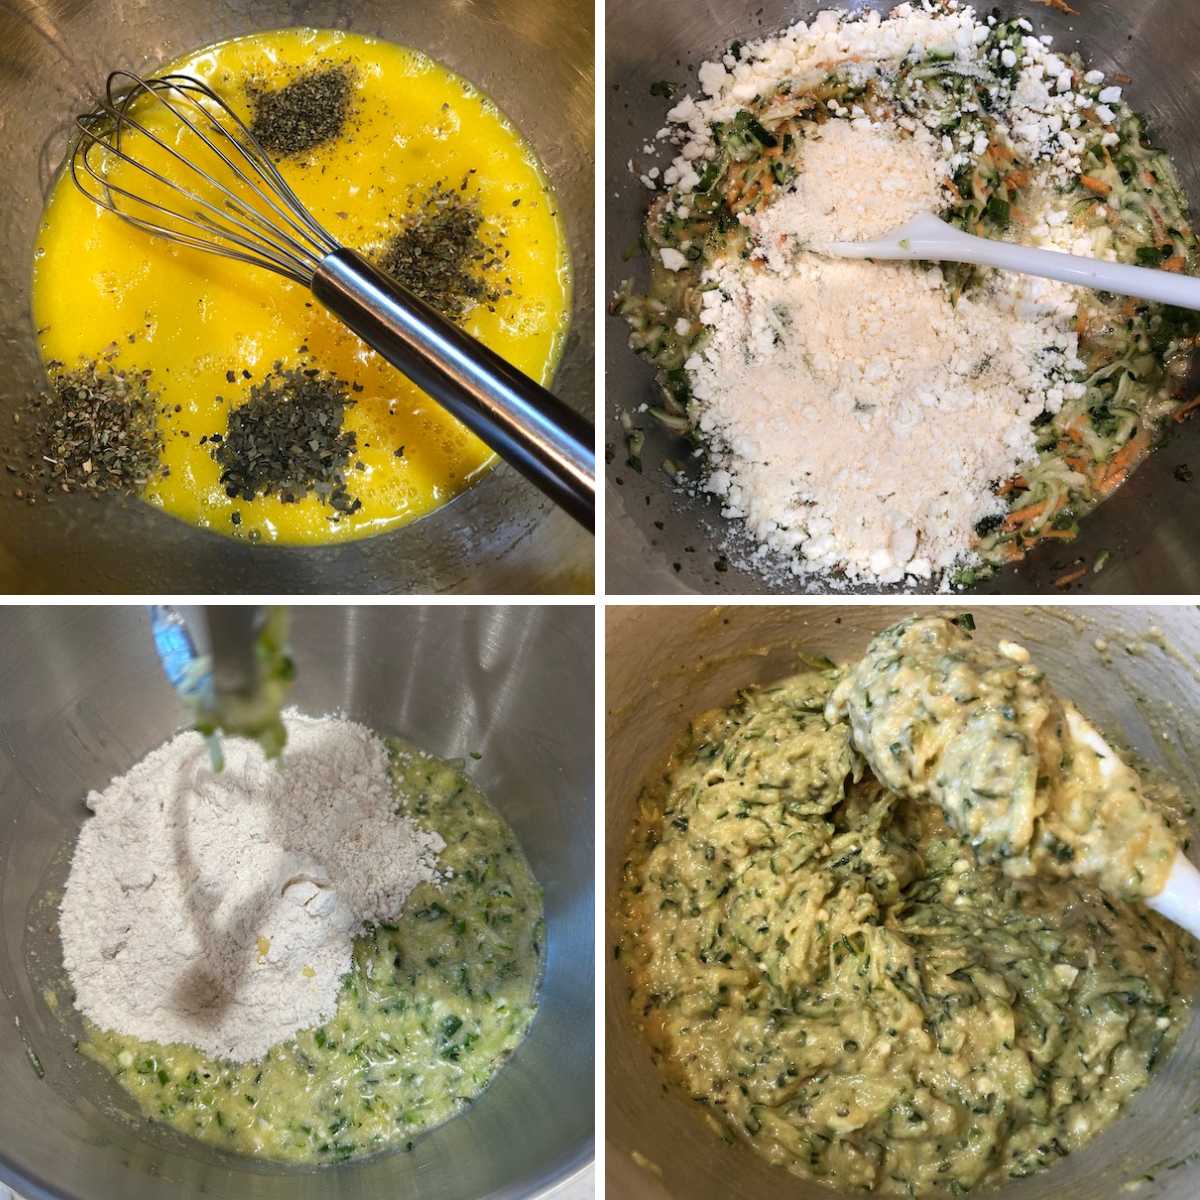 4 preparation steps: adding herbs to eggs & oil, adding cheeses, adding gluten free flour, finished batter consistency 